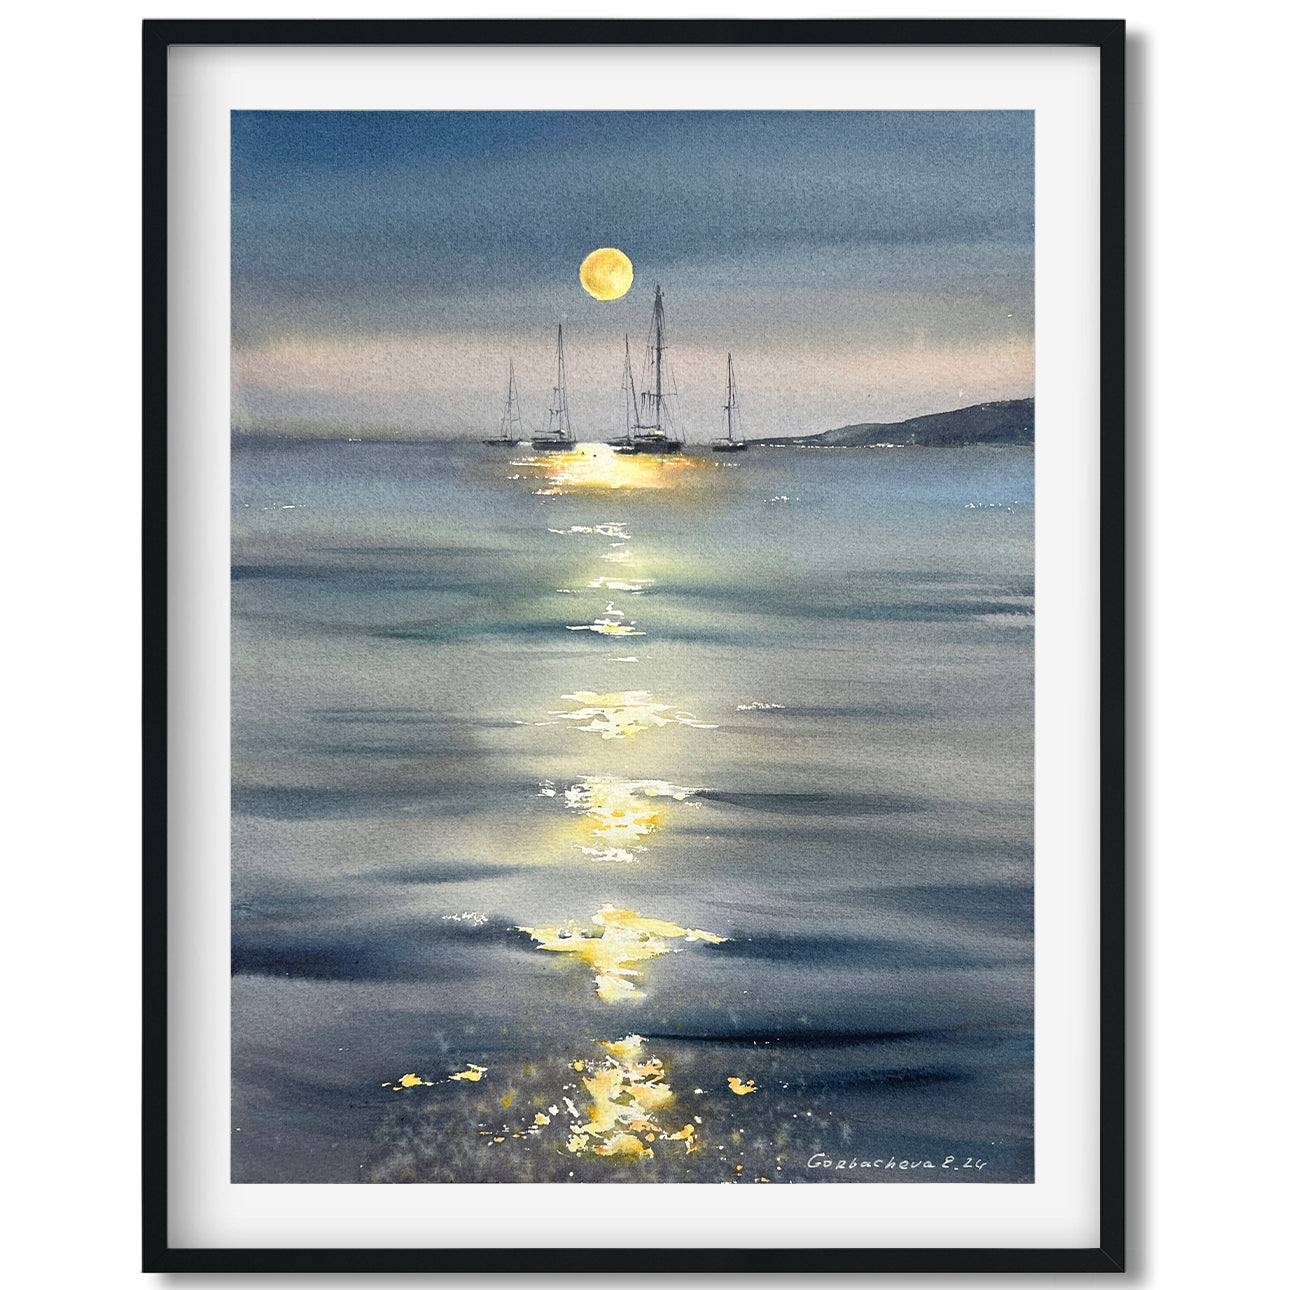 Yacht Painting Original, Small Watercolor Artwork - In the moonlight #5